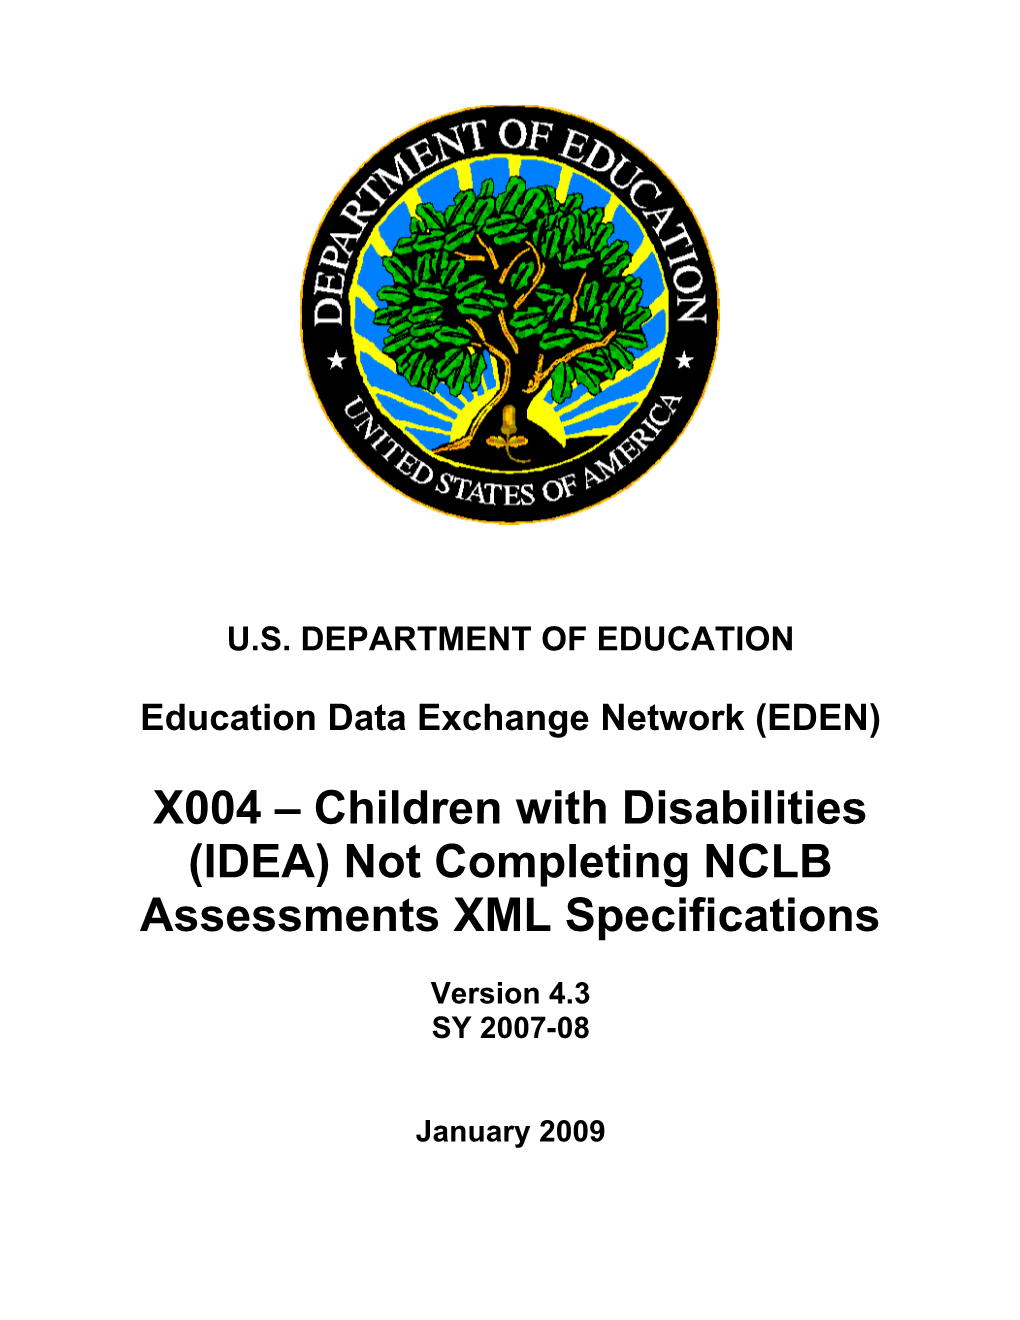 X004 Children with Disabilities (IDEA) Not Completing NCLB Assessments XML Specifications